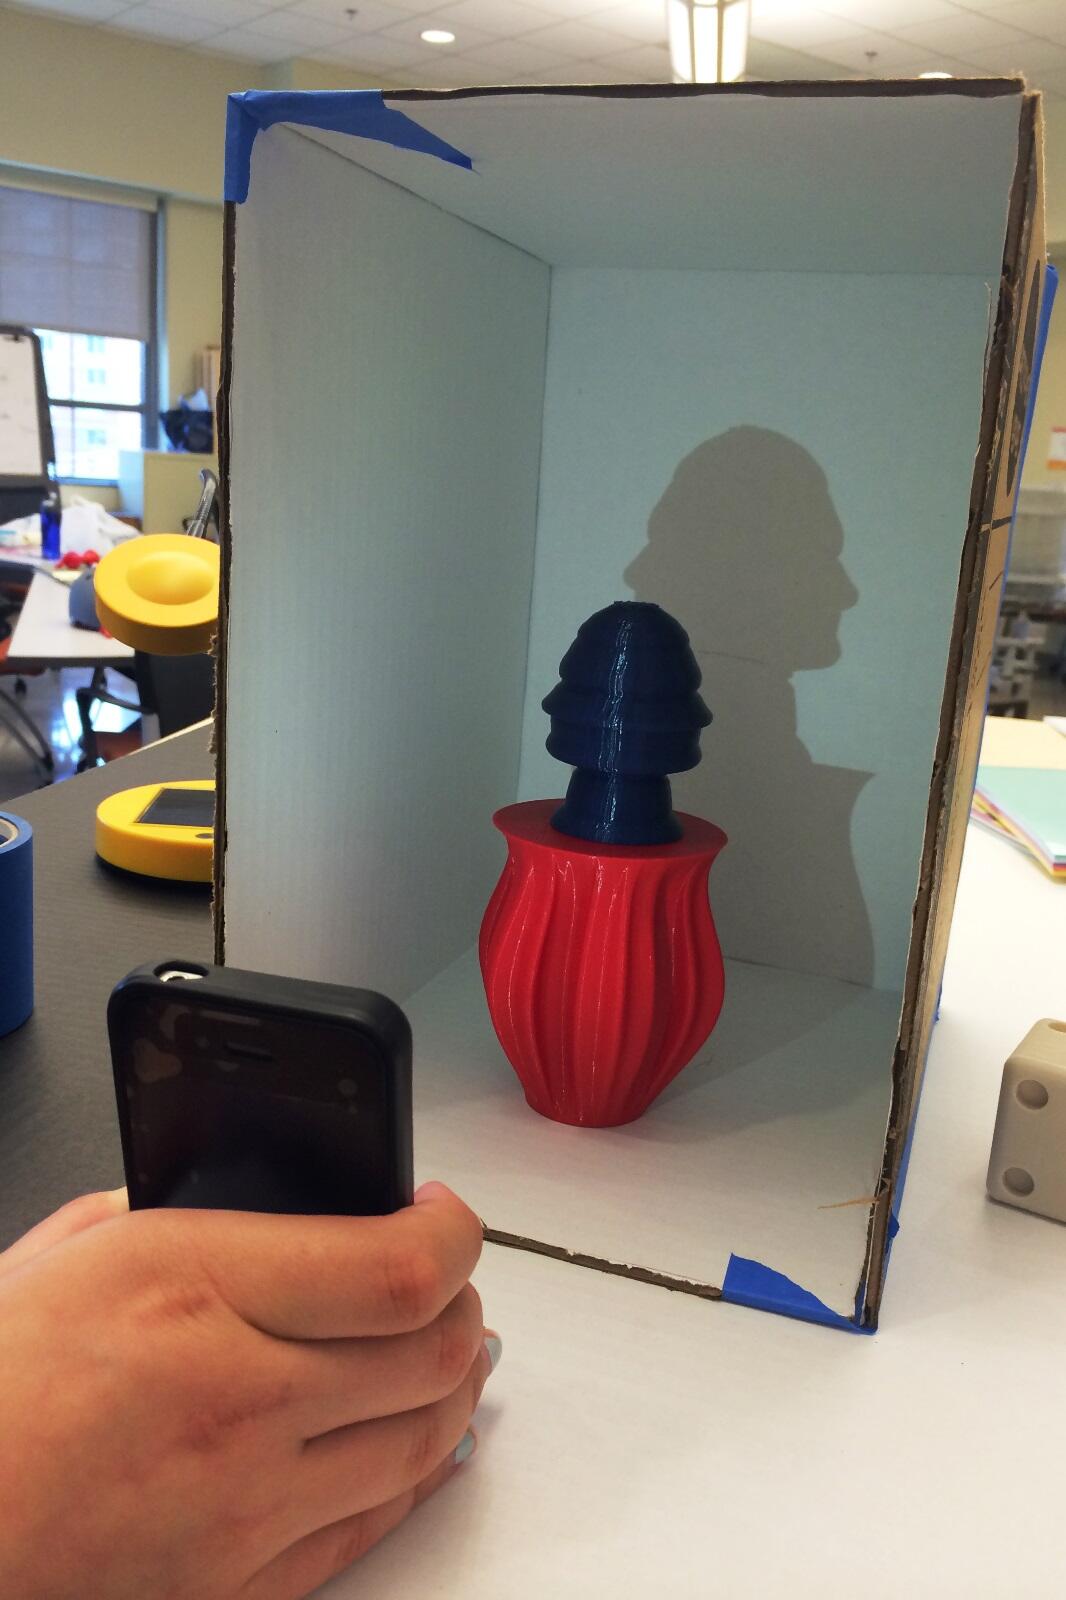 Kristina Hendel shines a light on a 3-D-printed object based on the contours of Thomas Jefferson's profile on the nickel. Hendel's team is exploring the business opportunities of offering similar 3-D objects that capture the likenesses of children or grandchildren. 